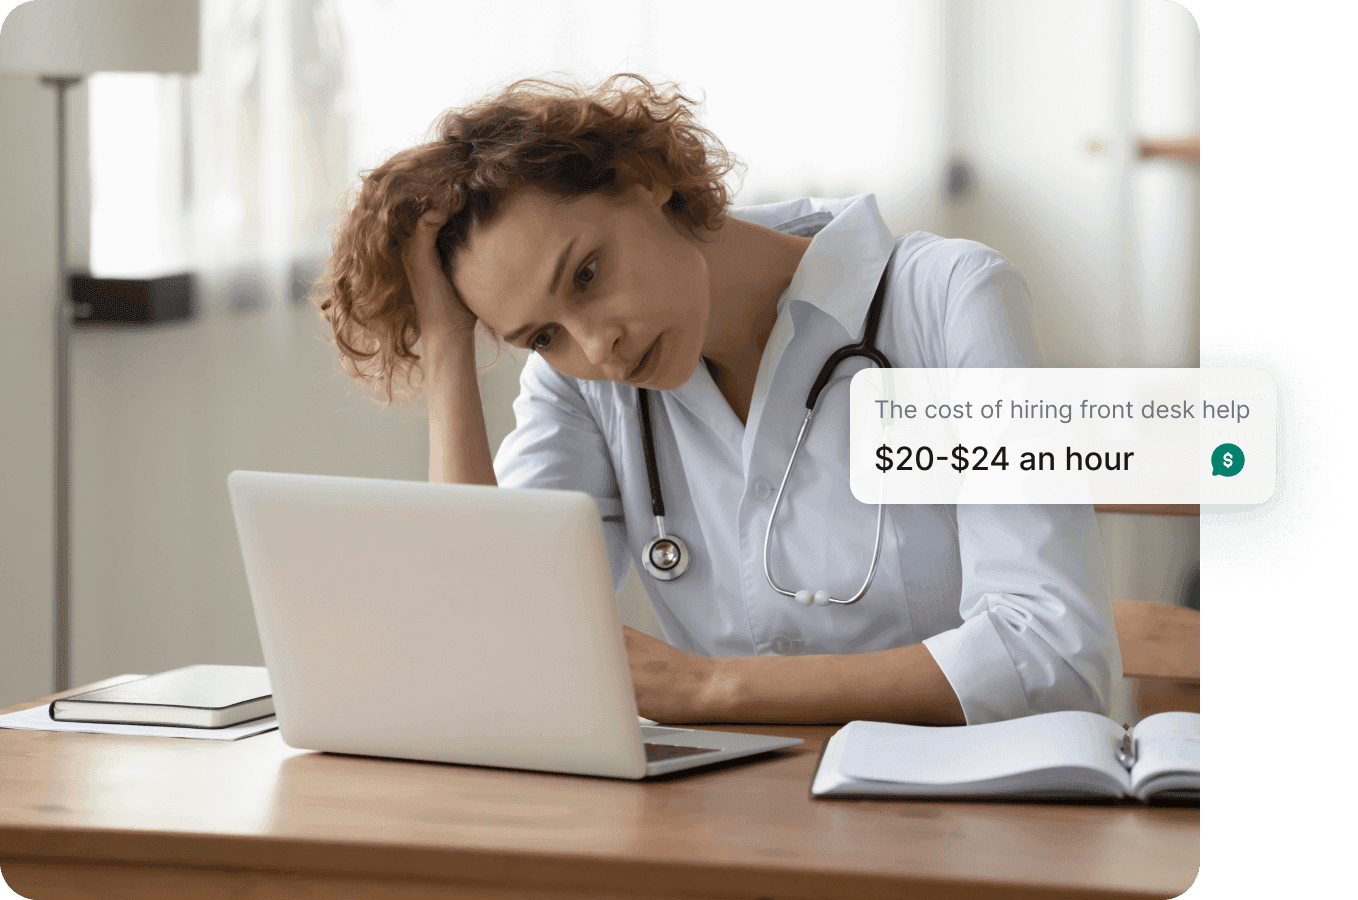 The cost of hiring front desk staff